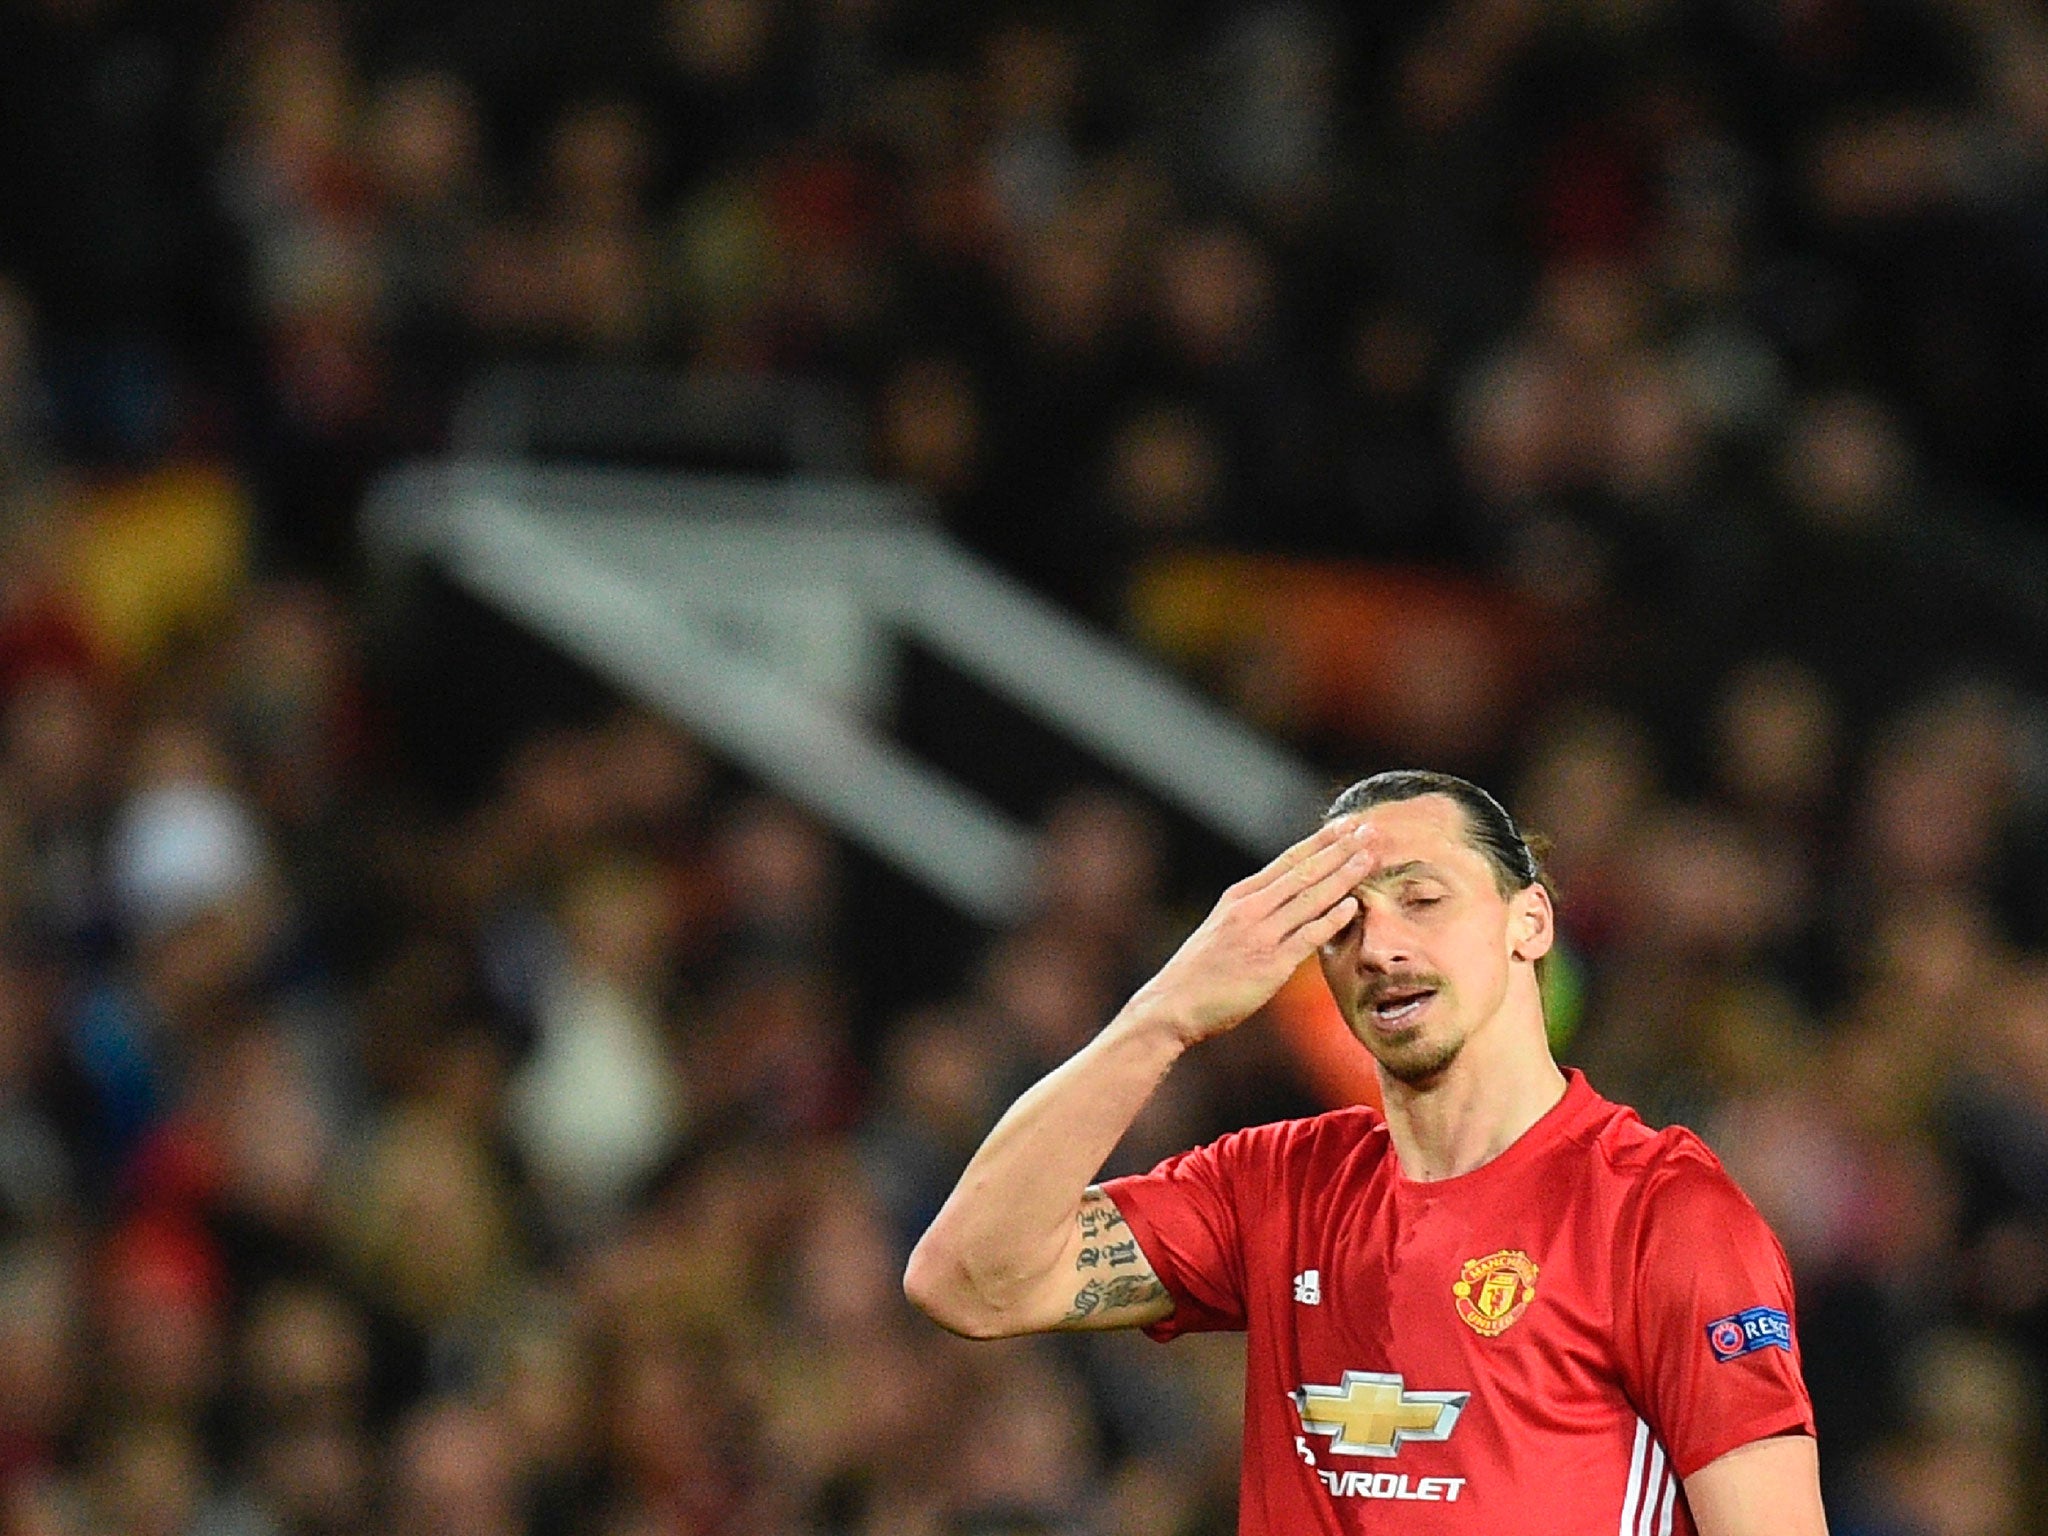 Zlatan Ibrahimovic's future at the club remains unclear